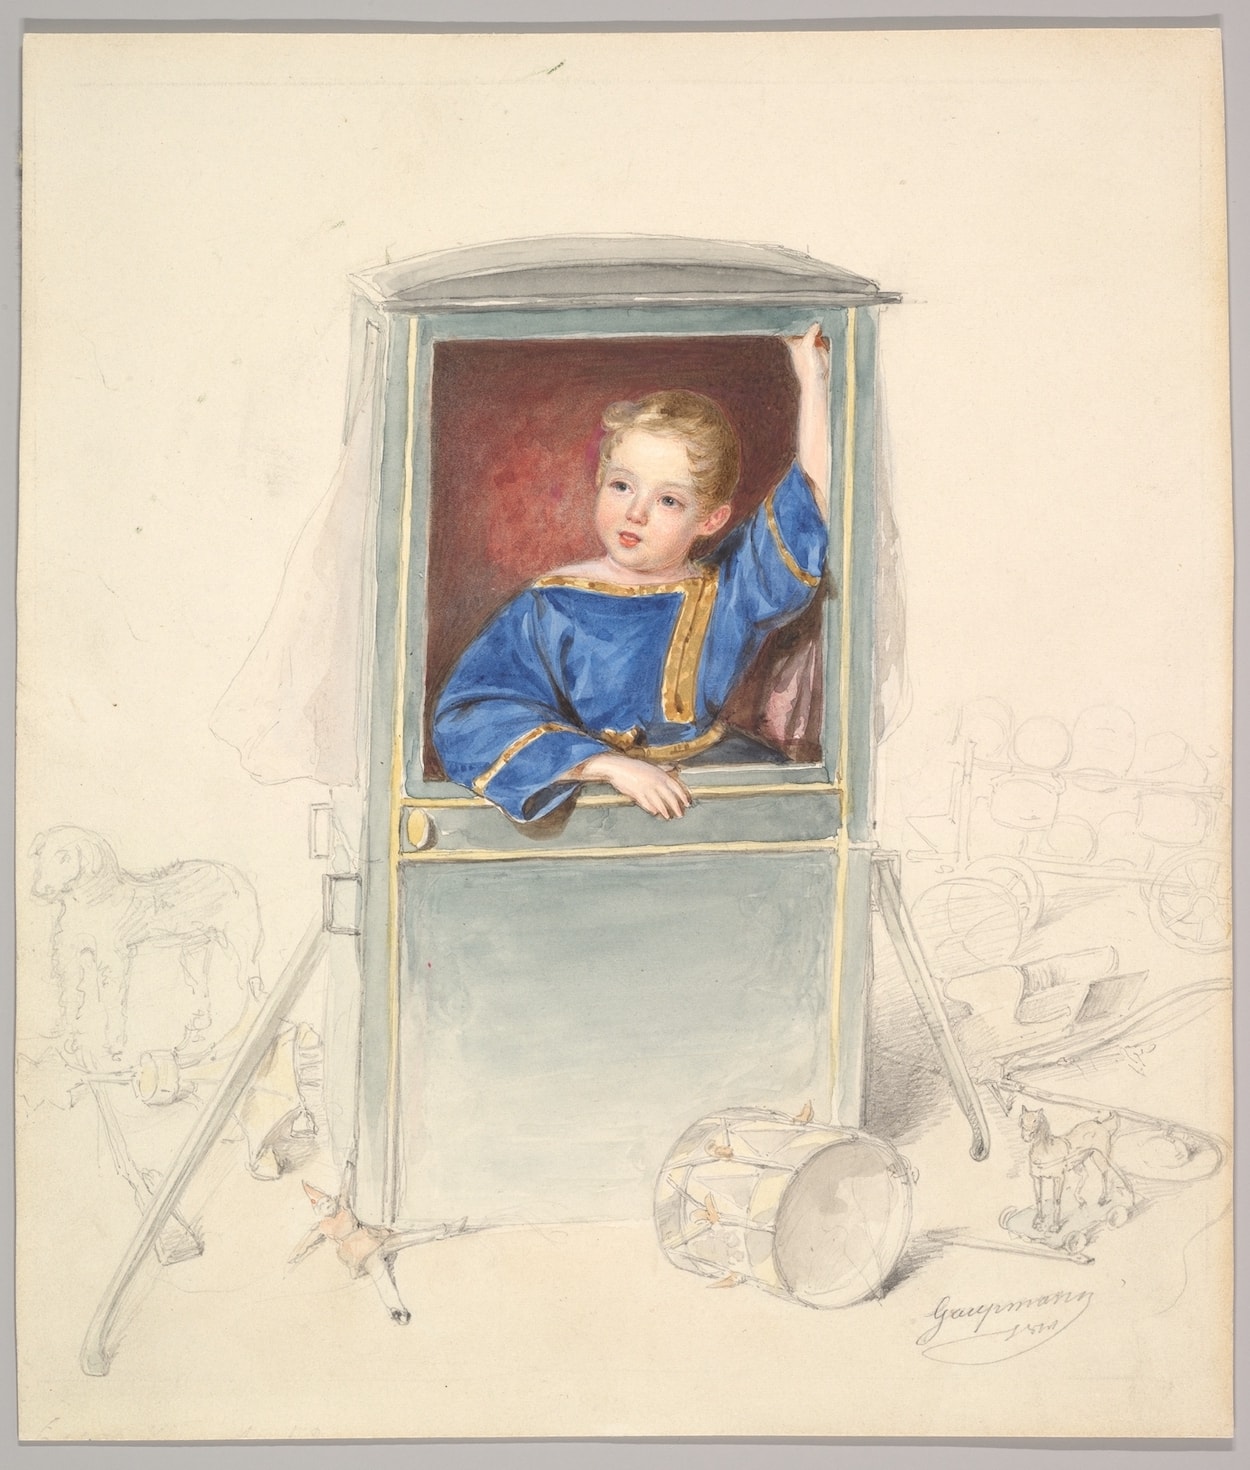 Prince Paul Clemens von Metternich as a Child, Surrounded by Toys, Rudolf Gaupmann, 1841, The Metropolitan Museum of Art (article on secure attachment)